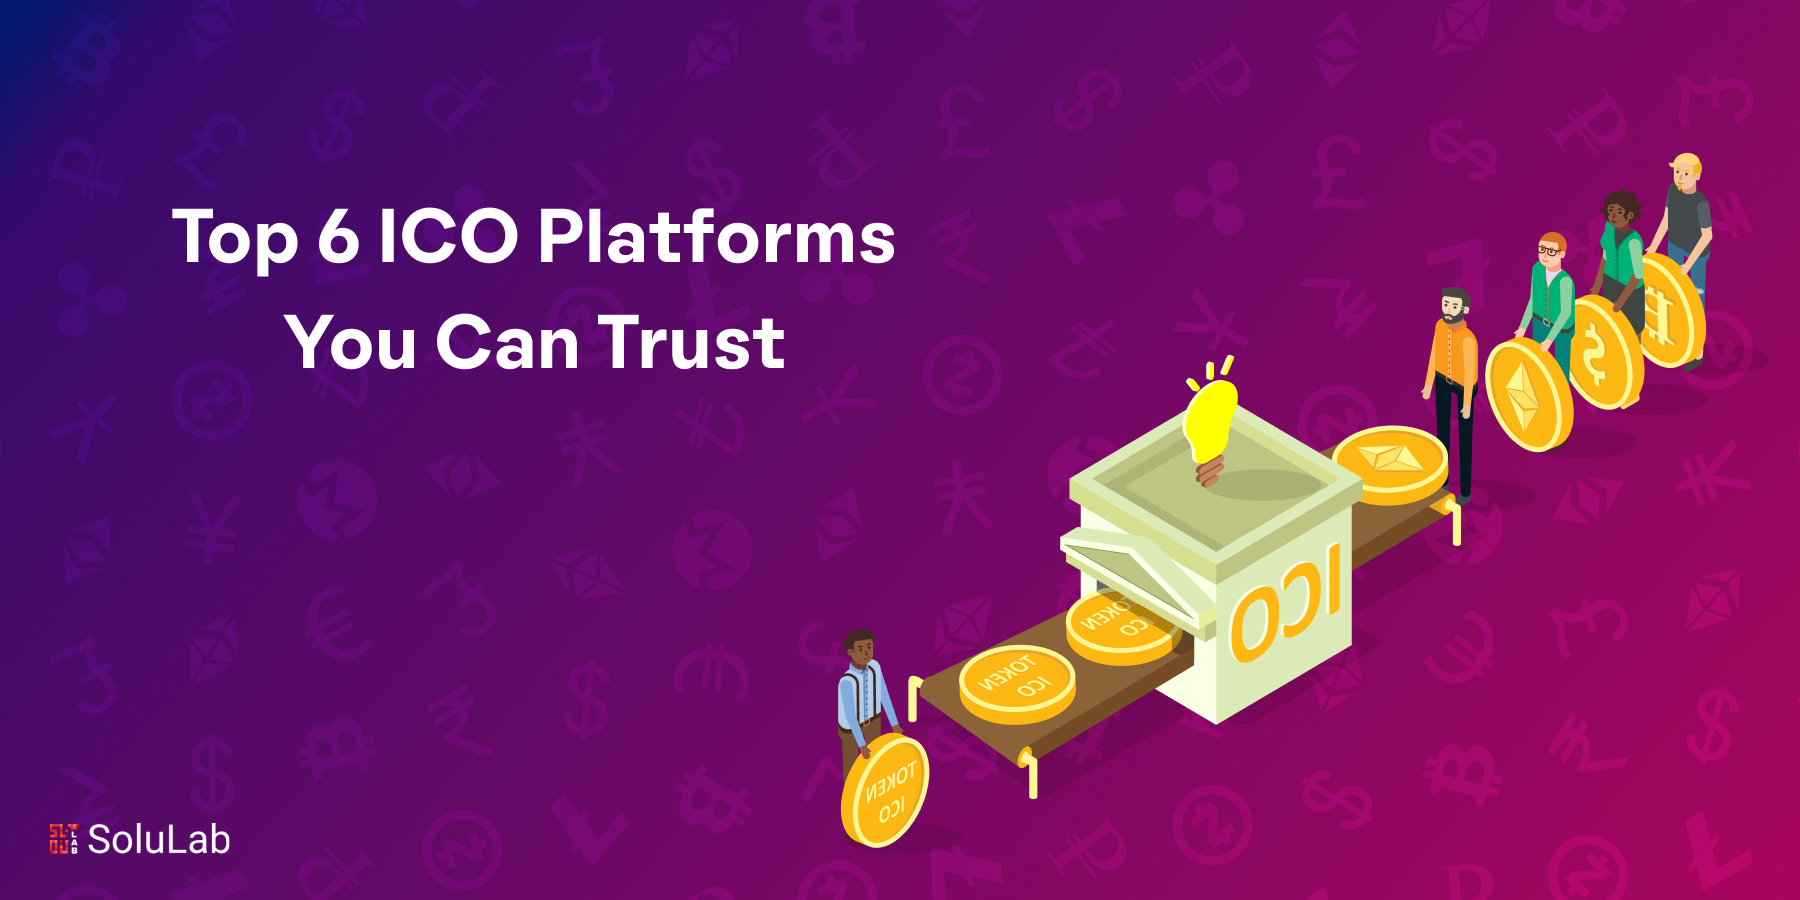 Top 6 ICO Platforms You Can Trust